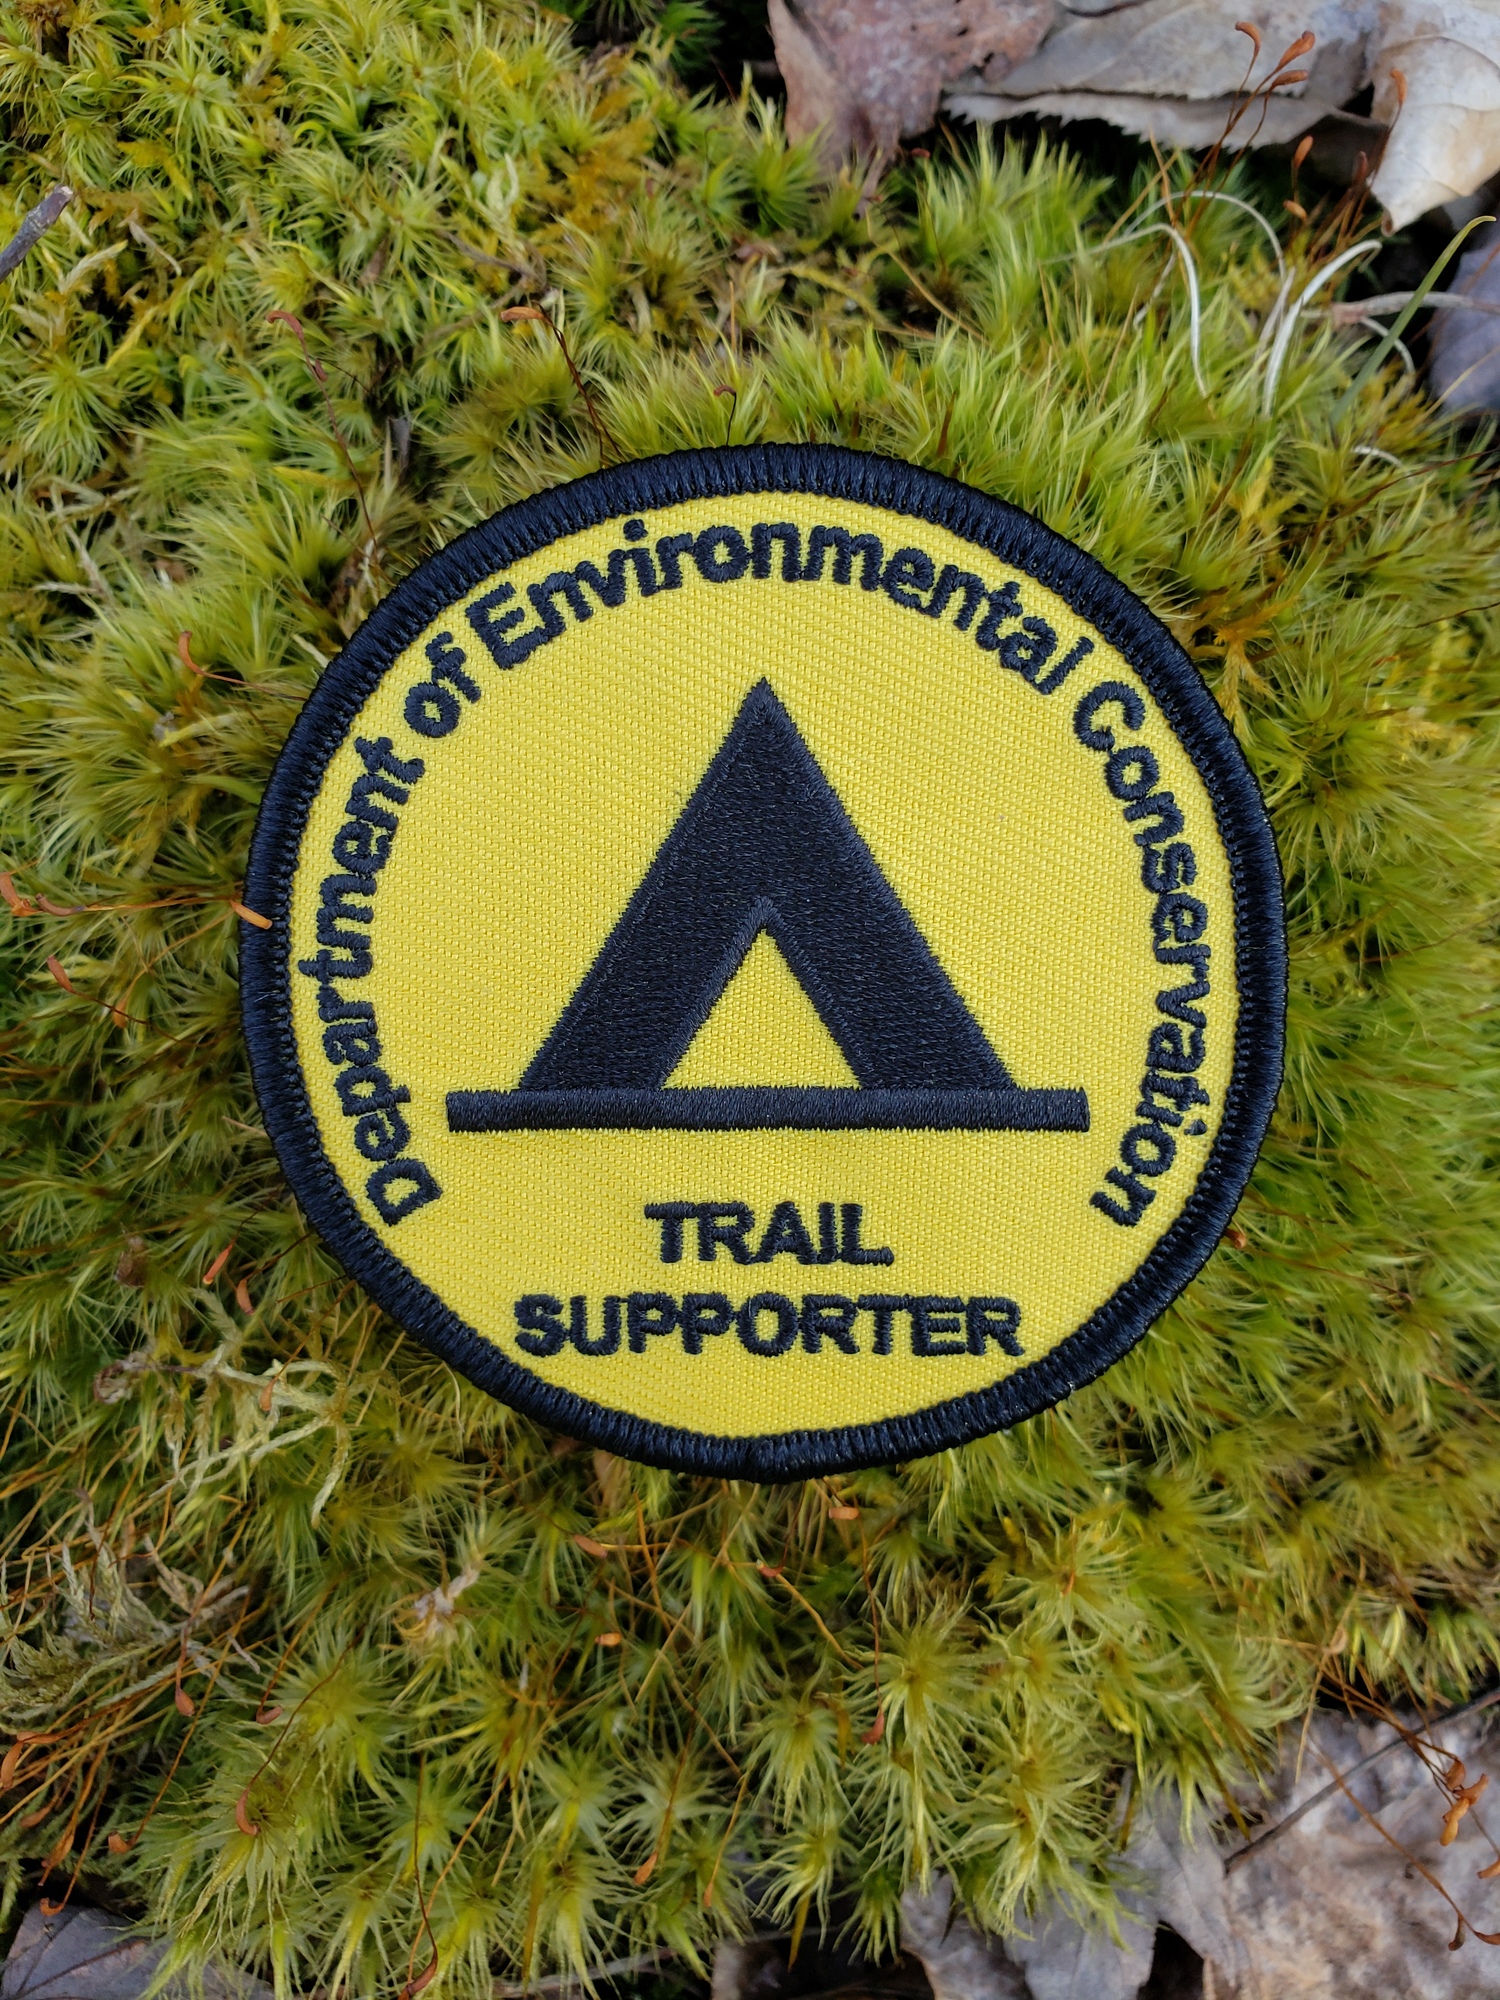 Camping patch with tent symbol on yellow background